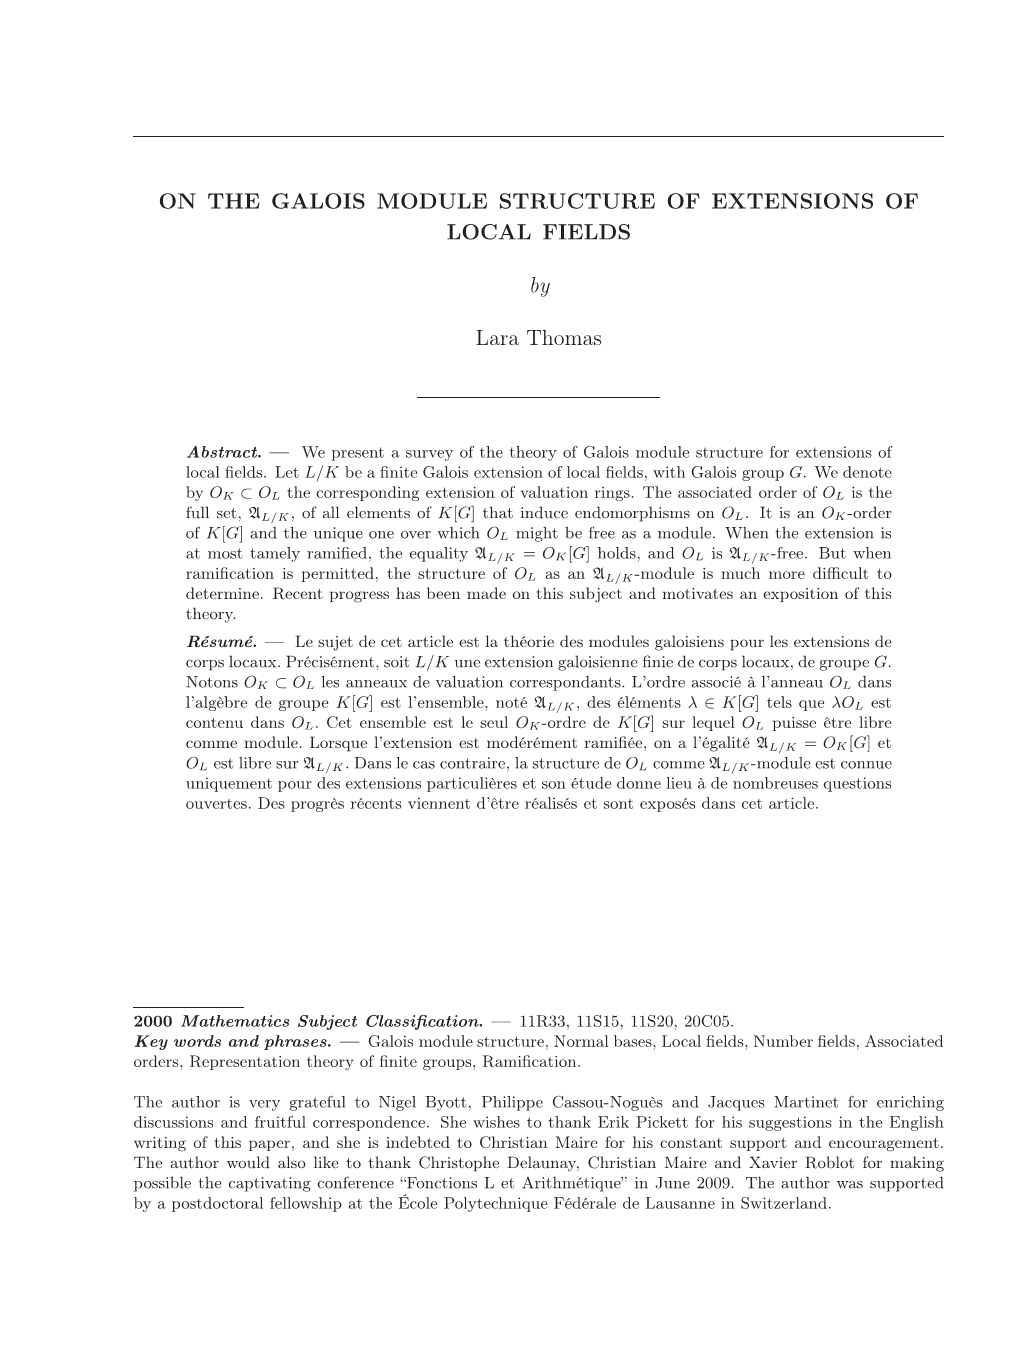 On the Galois Module Structure of Extensions of Local Fields